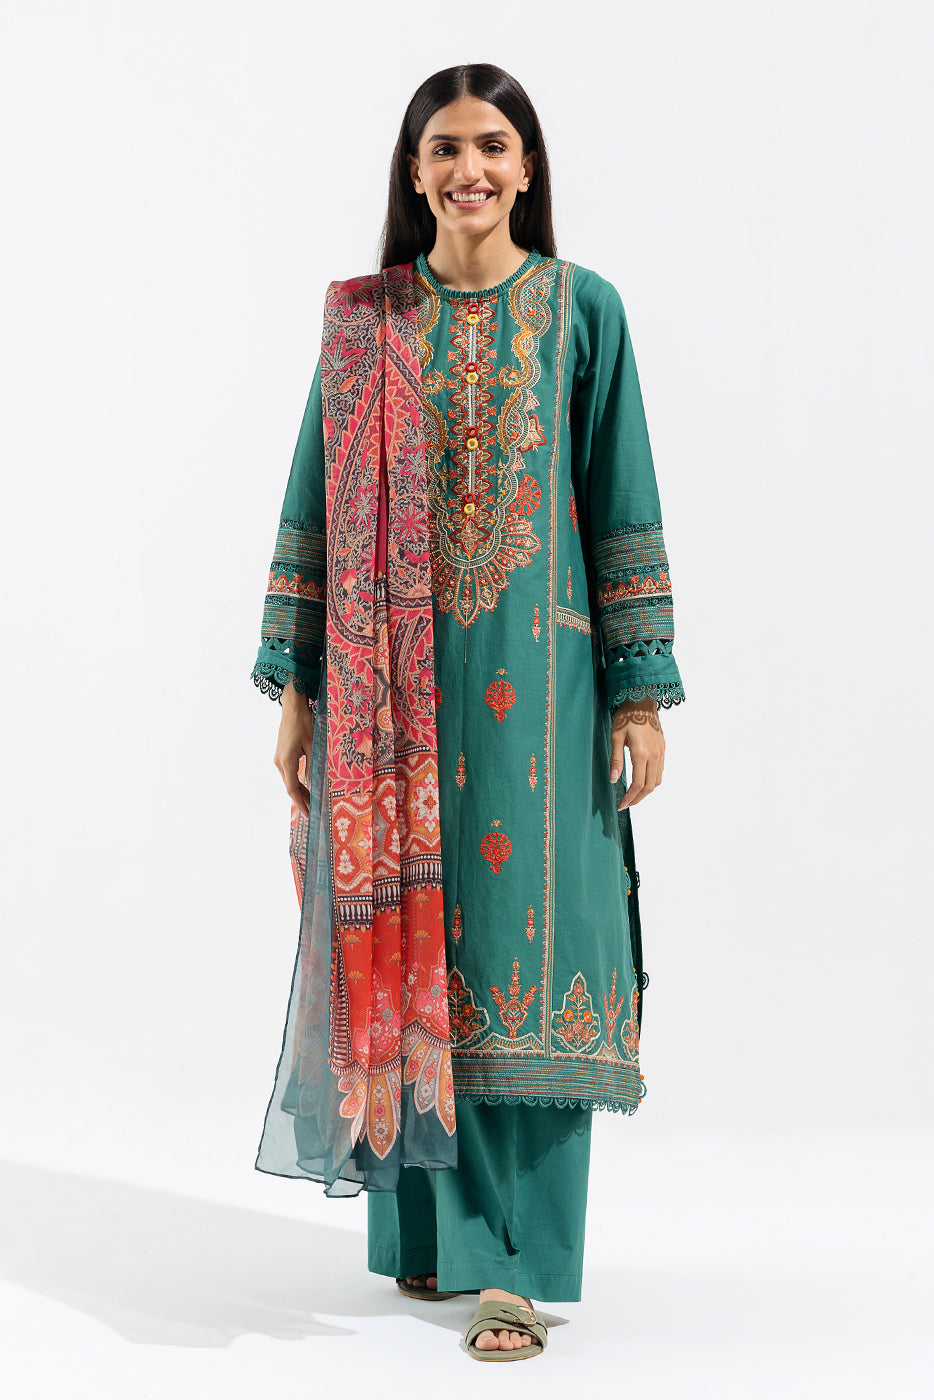 3 PIECE - EMBROIDERED LAWN SUIT - ETHNIC SAPPHIRE